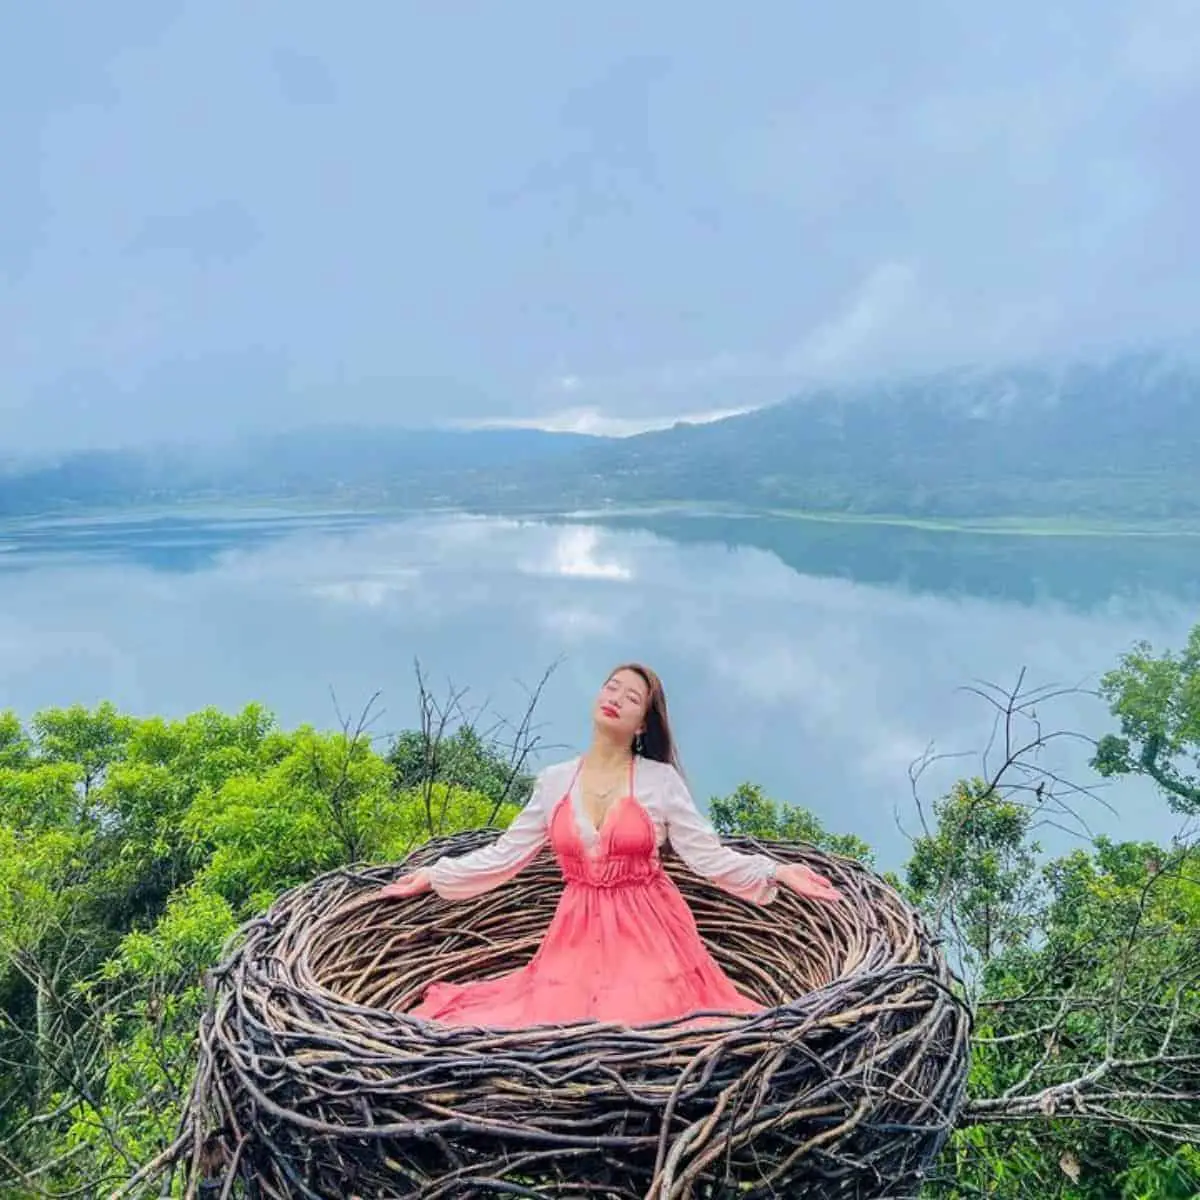 Very dramatic view of a lake in Wanagiri Hidden Hills with a woman sitting in a bird nest inhaling the fresh air